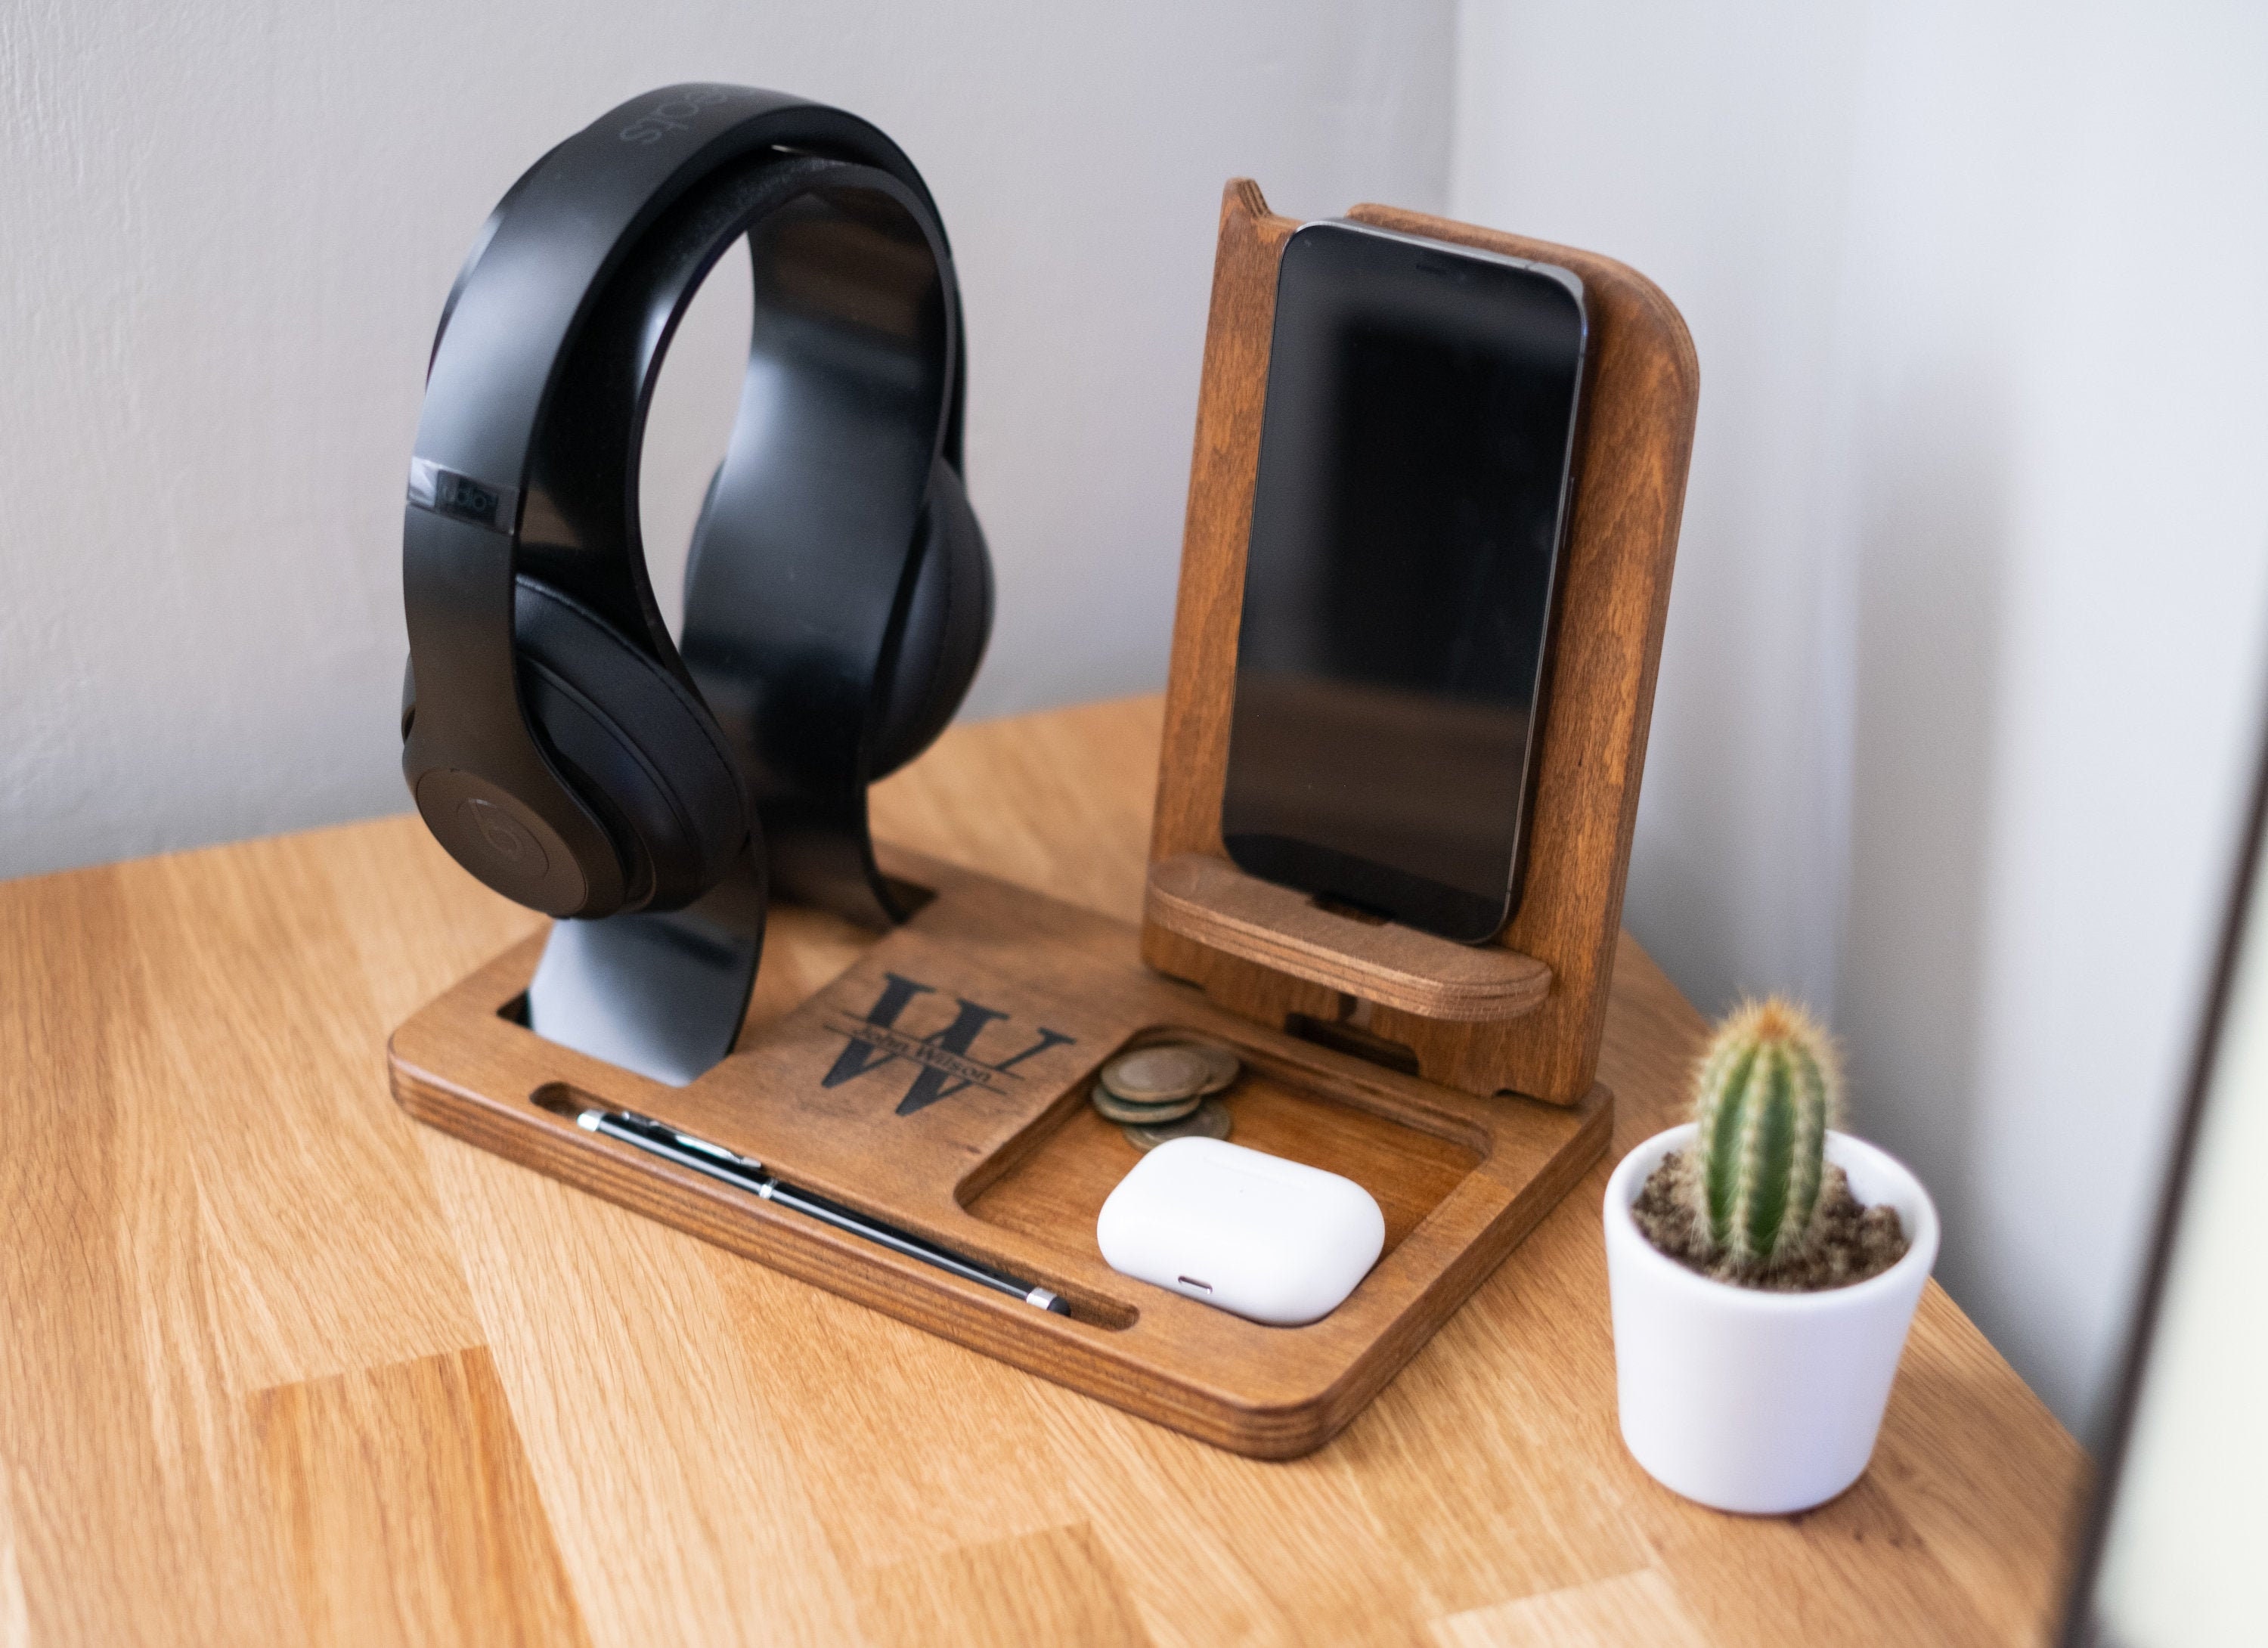 Wooden headphone holder is also a magnificent piece of sculptural